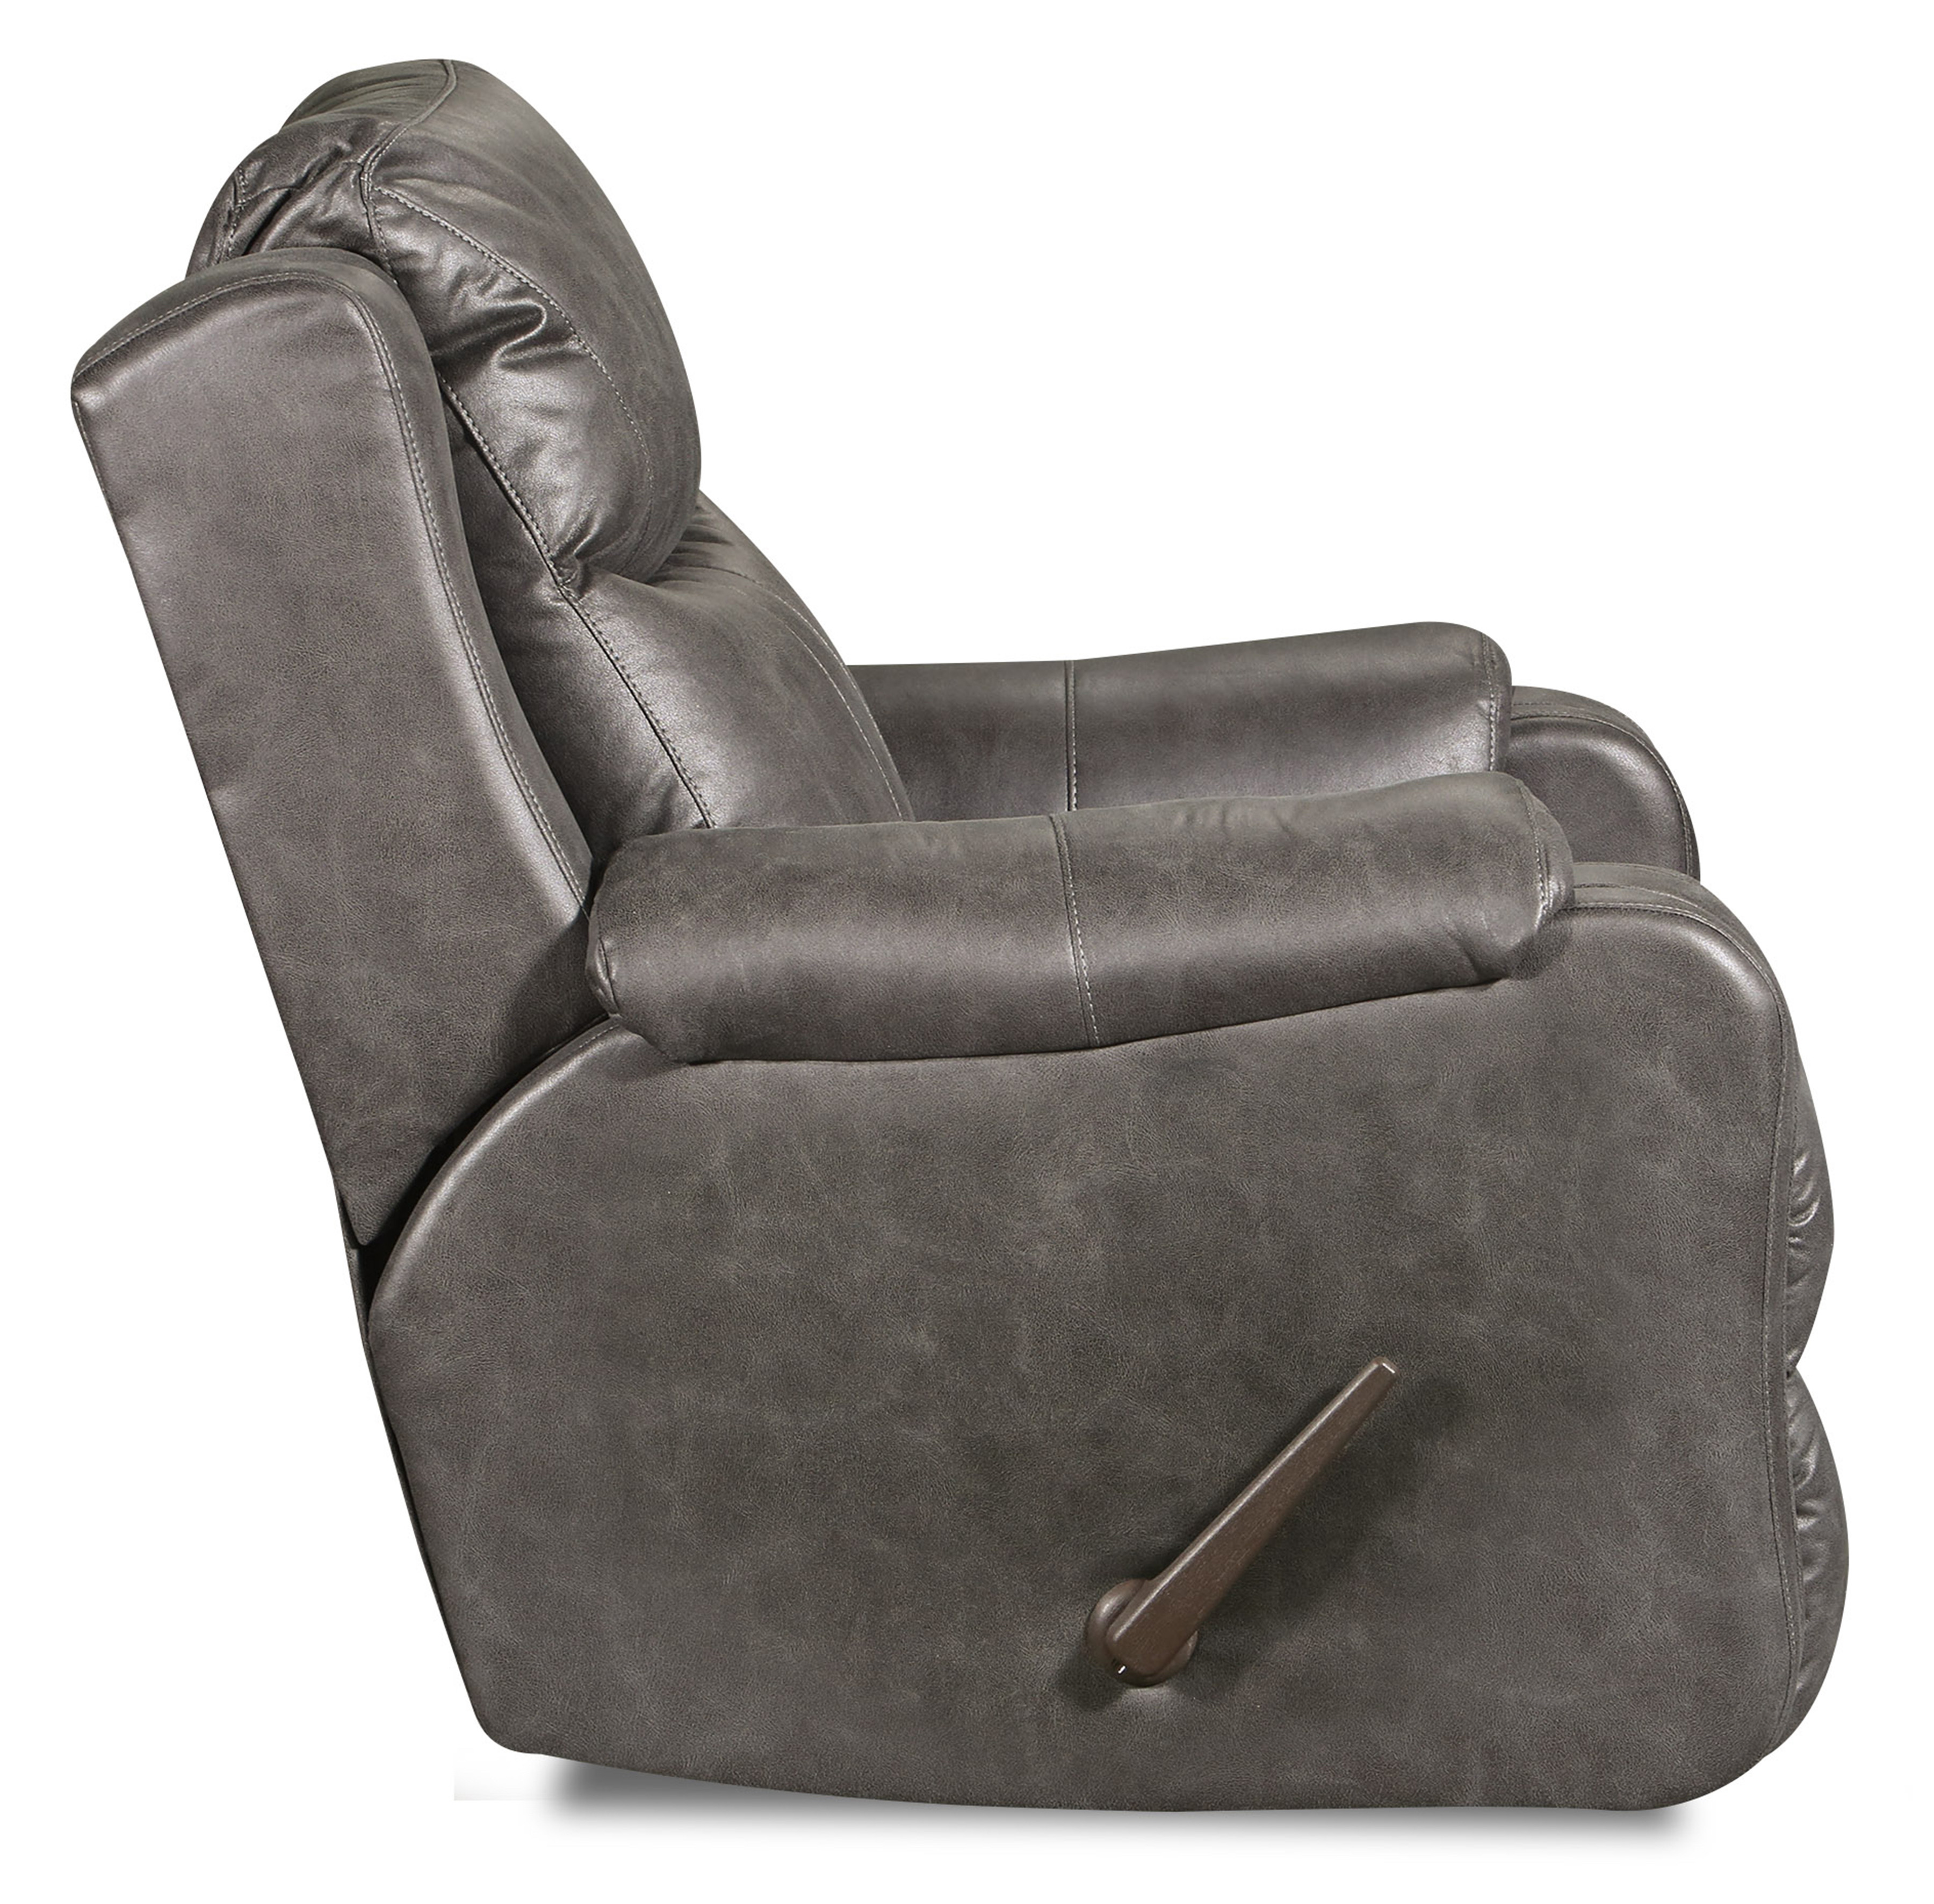 1881 Marvel Recliner Southern Motion